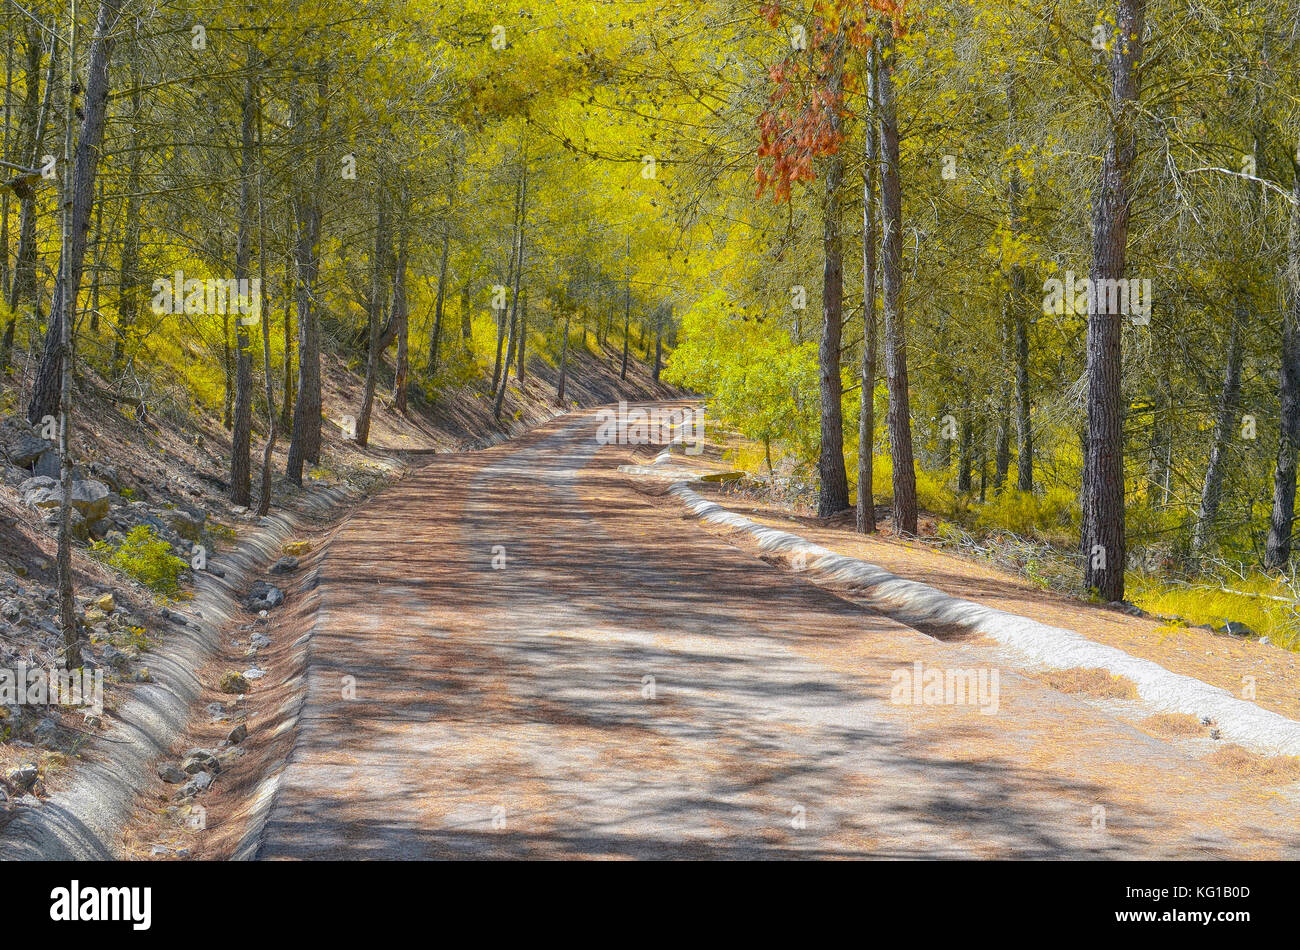 Scene of a mountain road with dry leaves over the pavement and trees around, with yellowish leaves. Colorful landscape. Mediterranean forest Stock Photo